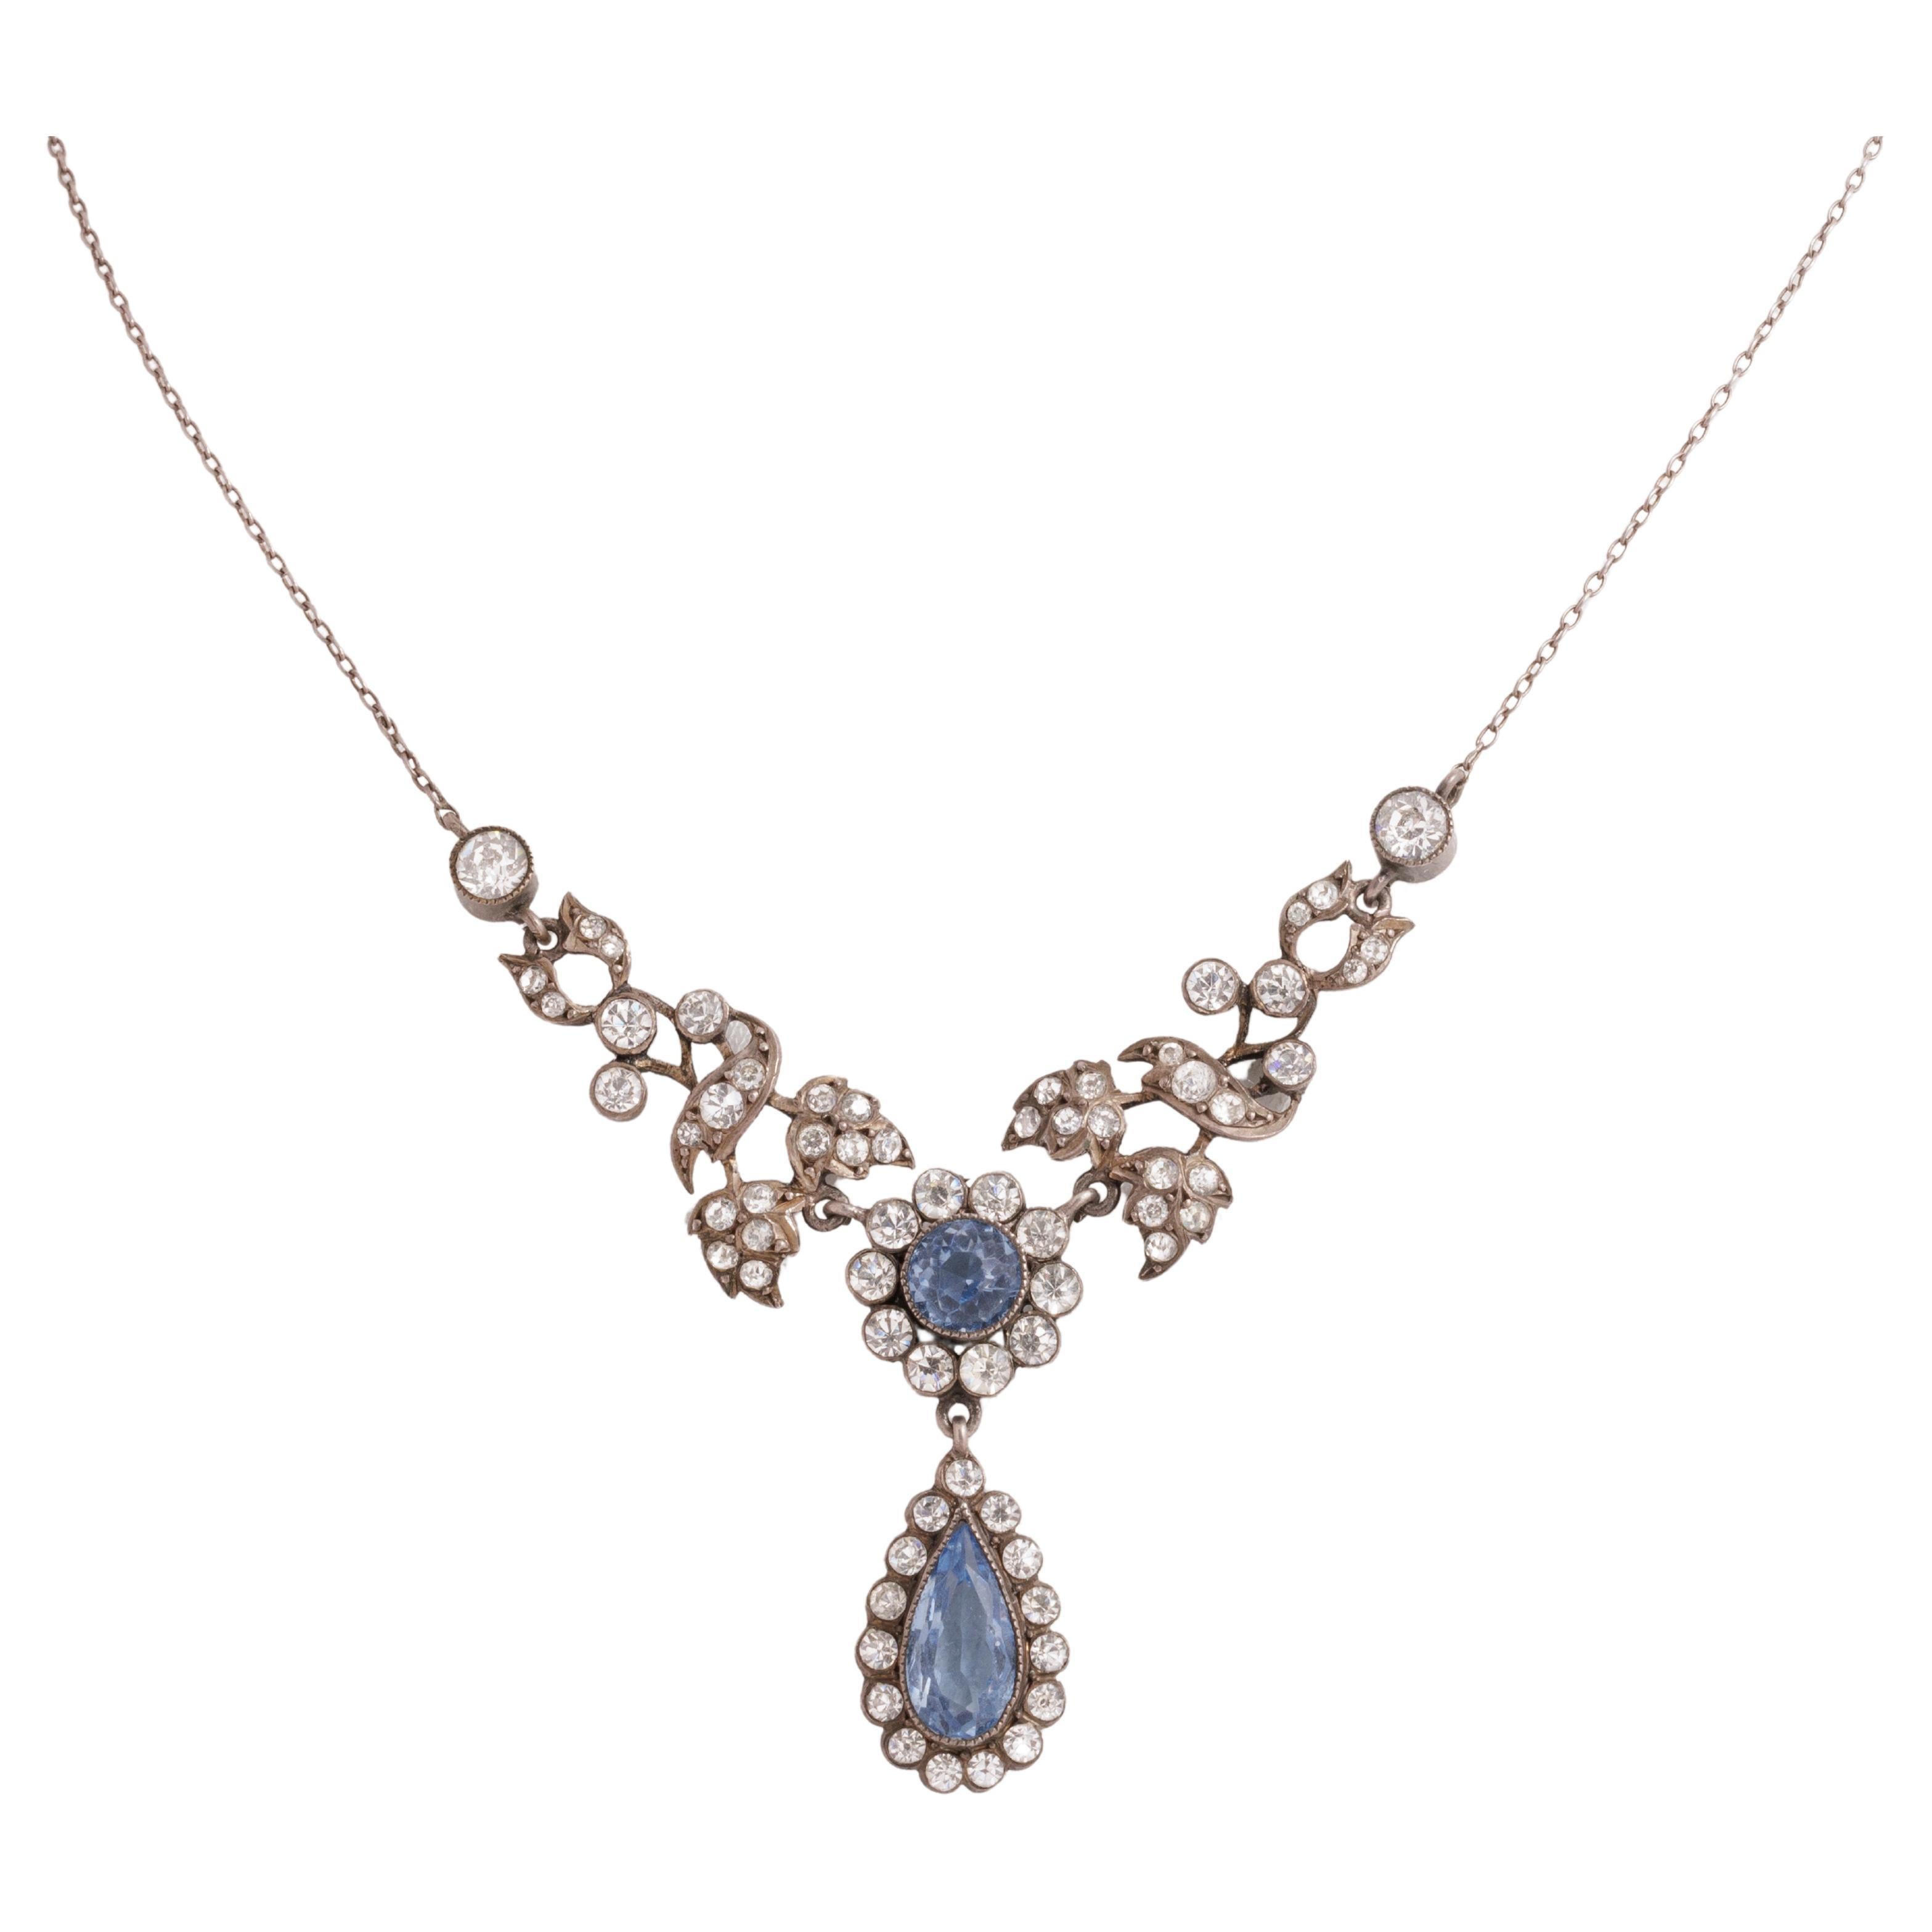 Antique Silver and Blue and Clear Paste Festoon Necklace